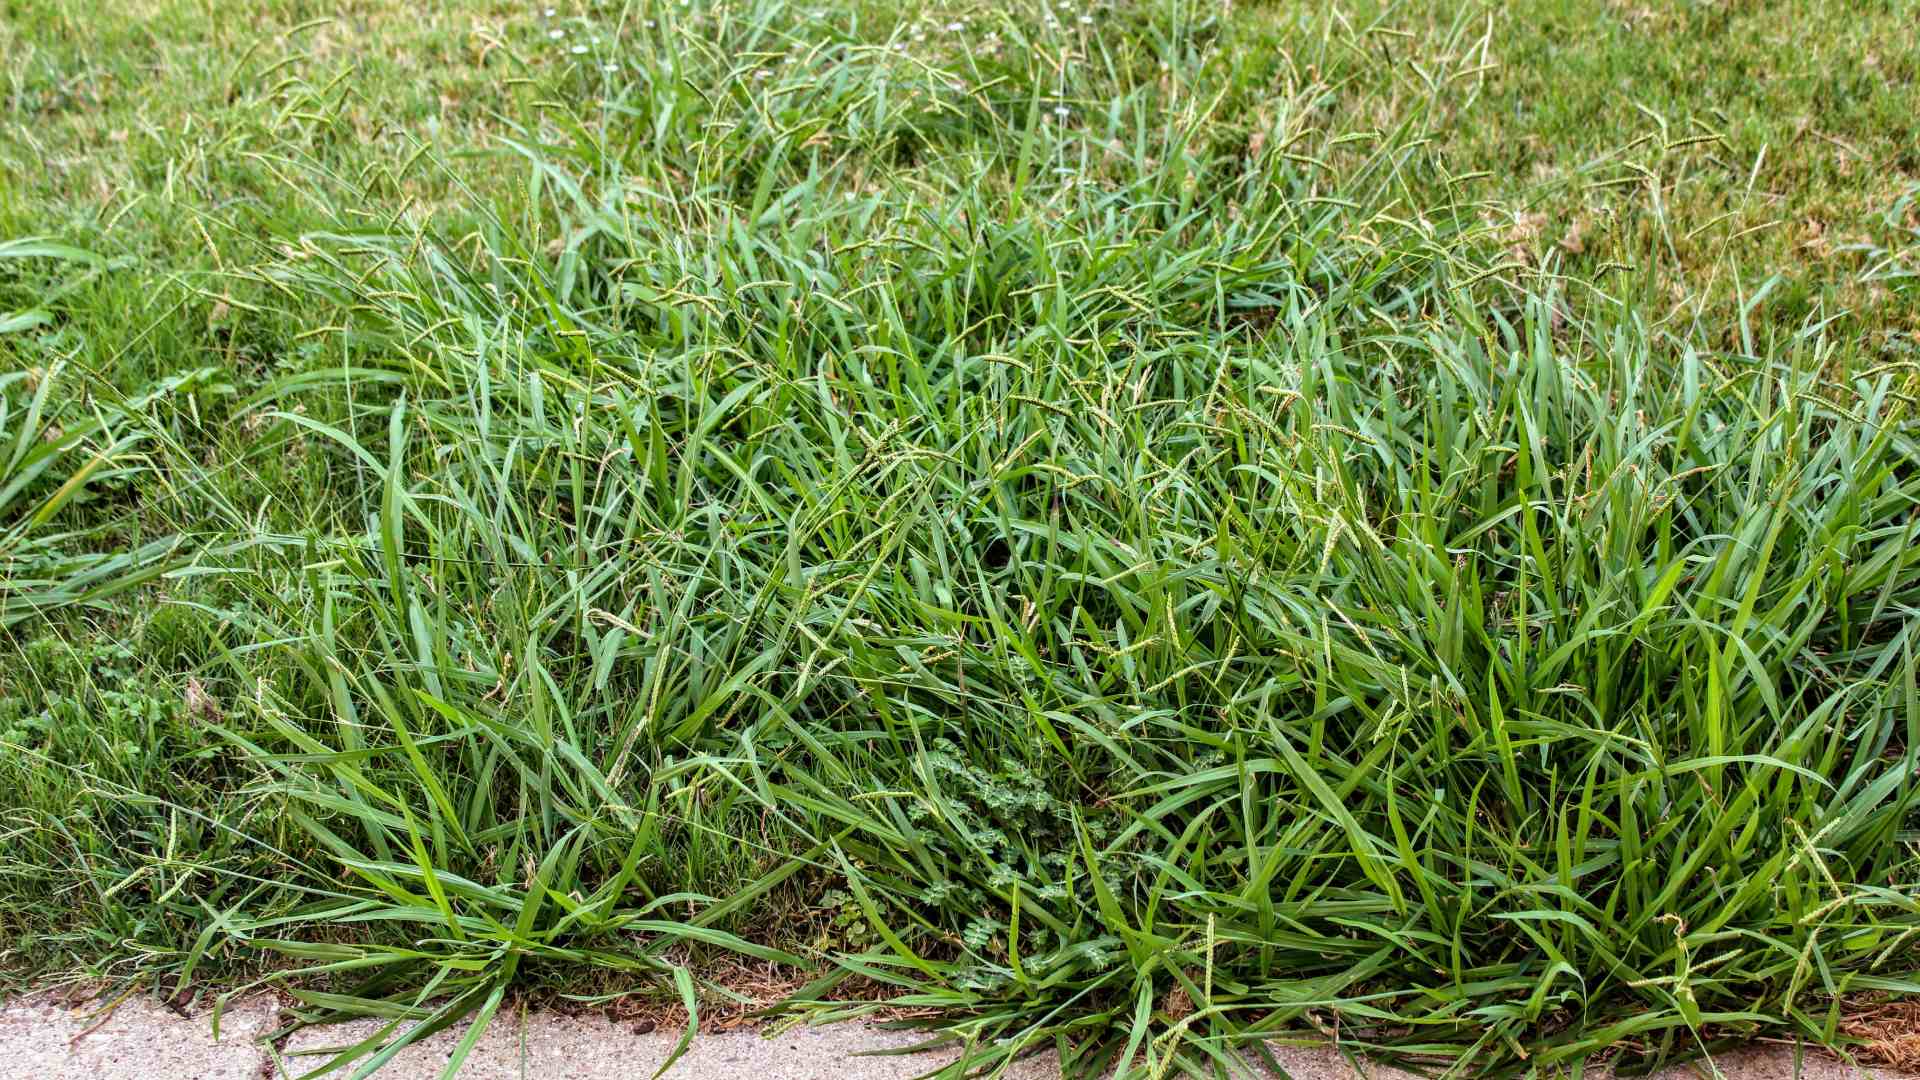 Watch Out for These 4 Stubborn Weeds in Kansas - They Spread Fast!